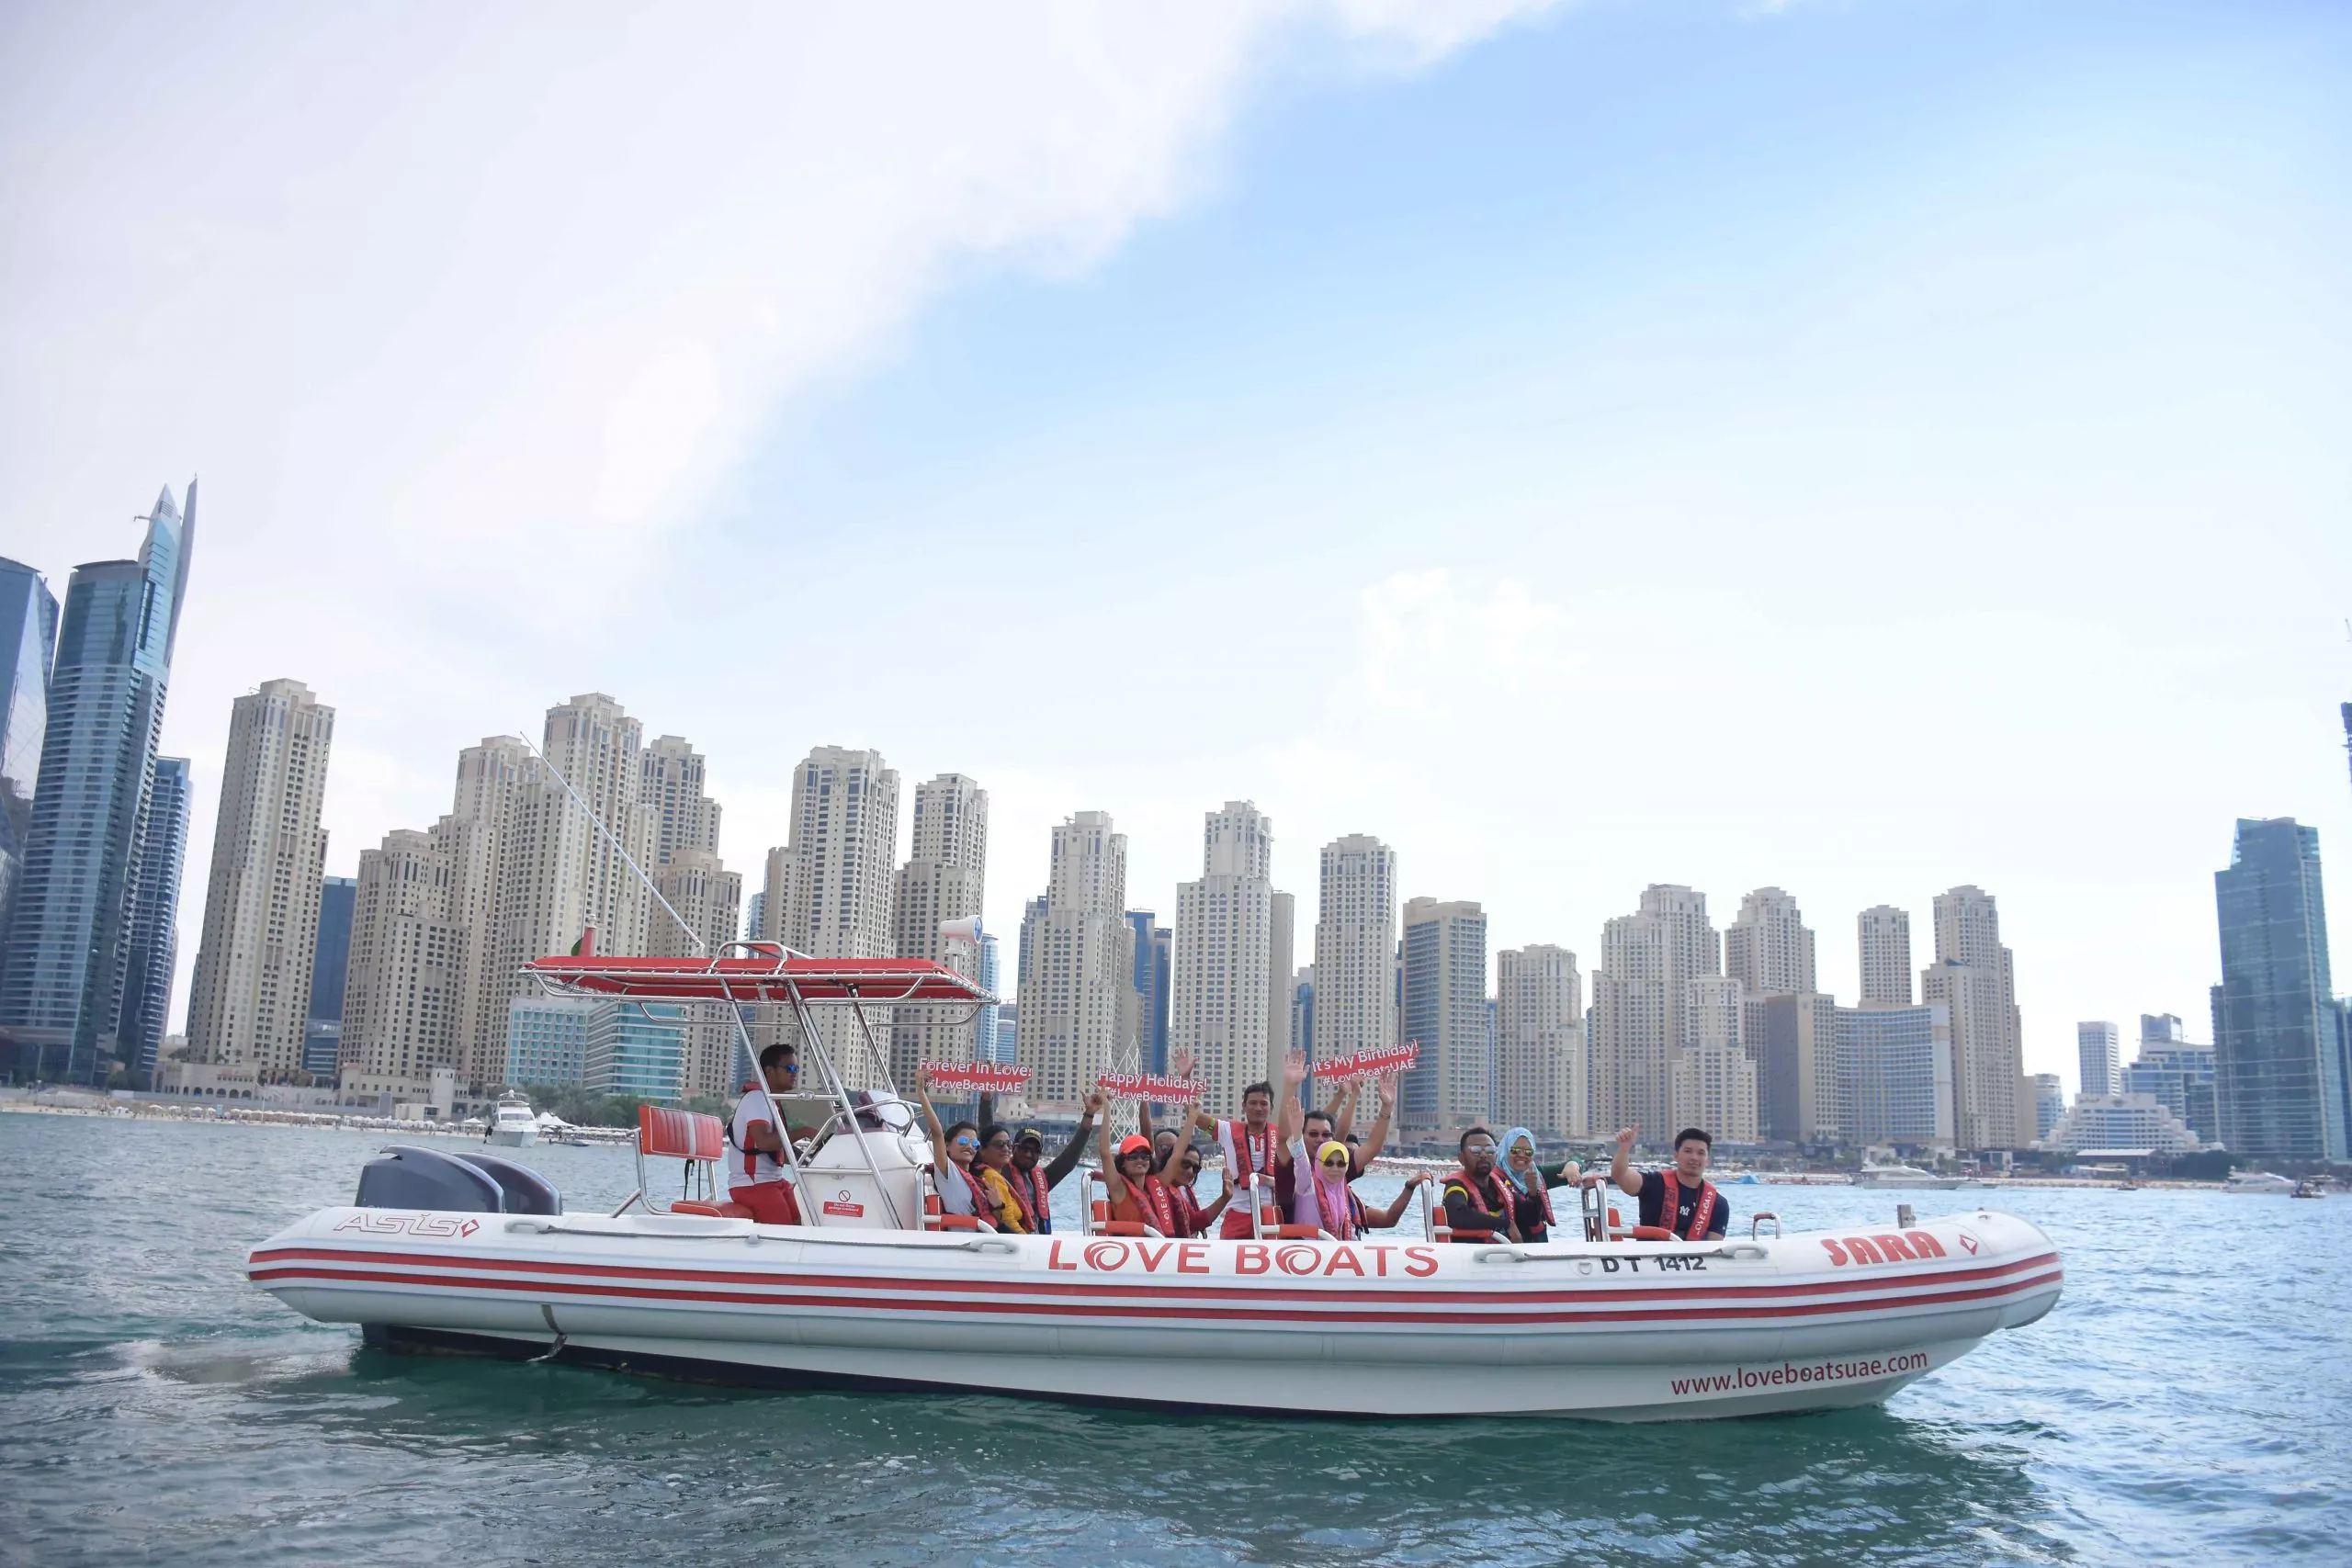 Love boats UAE in United Arab Emirates, Middle East | Speedboats - Rated 1.1